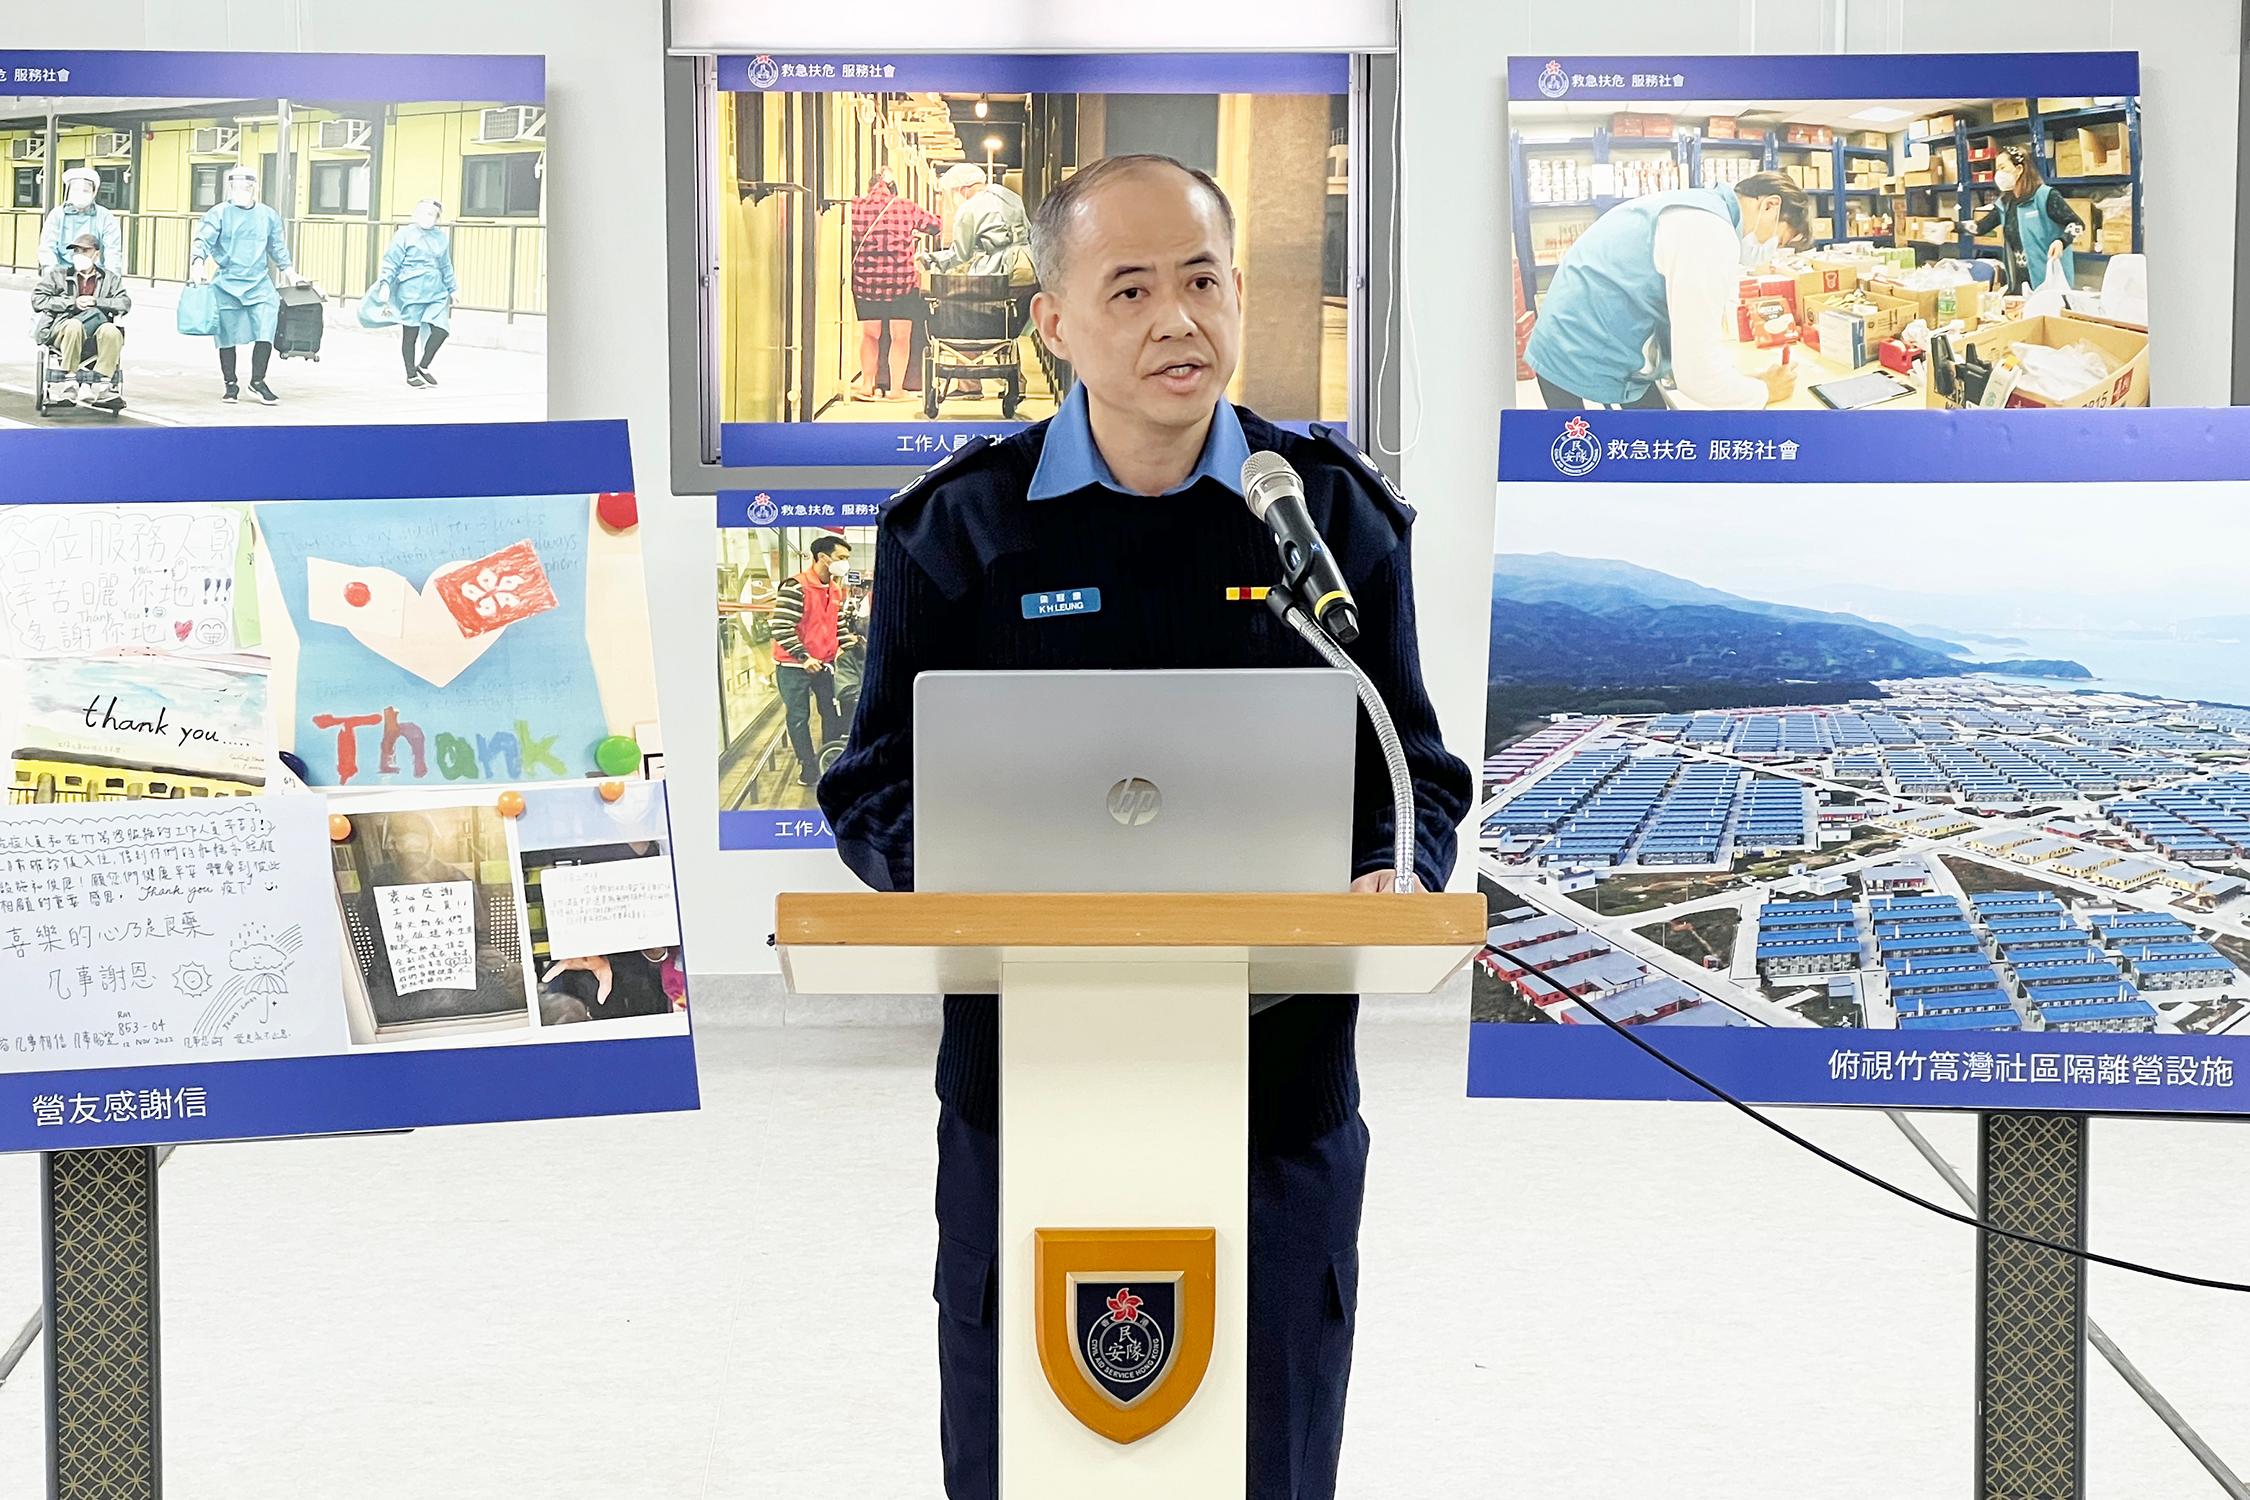 The closing ceremony of the Penny's Bay Community Isolation Facility (PBCIF) was held today (March 1). Photo shows the Chief Staff Officer of Civil Aid Service, Mr Leung Kwun-hong, summarising the operations conducted at the PBCIF.